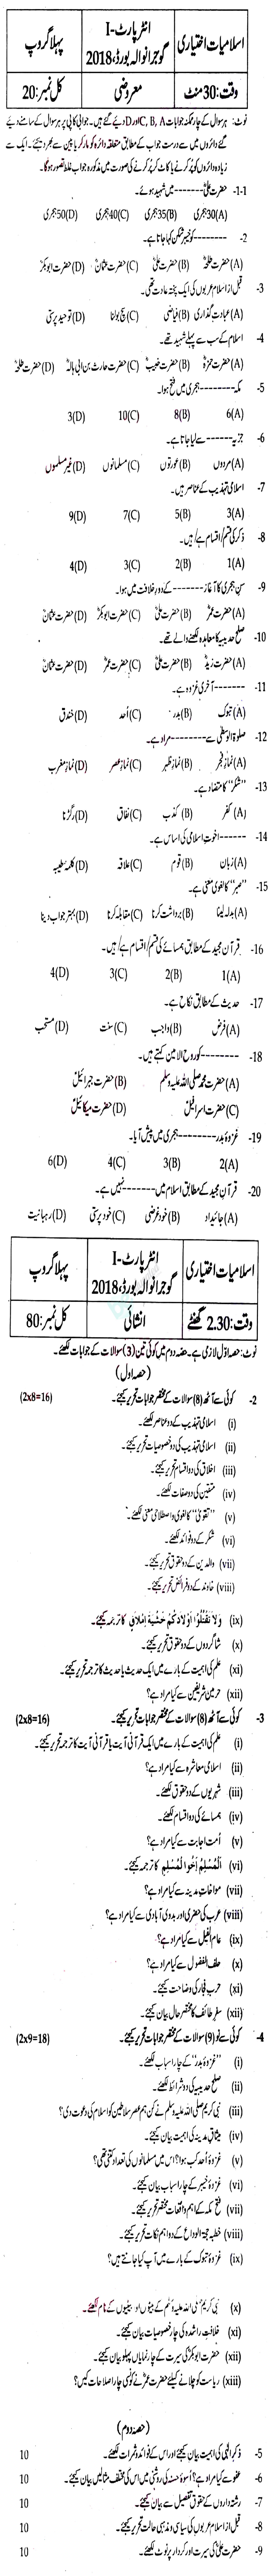 Islamiat Elective FA Part 1 Past Paper Group 1 BISE Gujranwala 2018